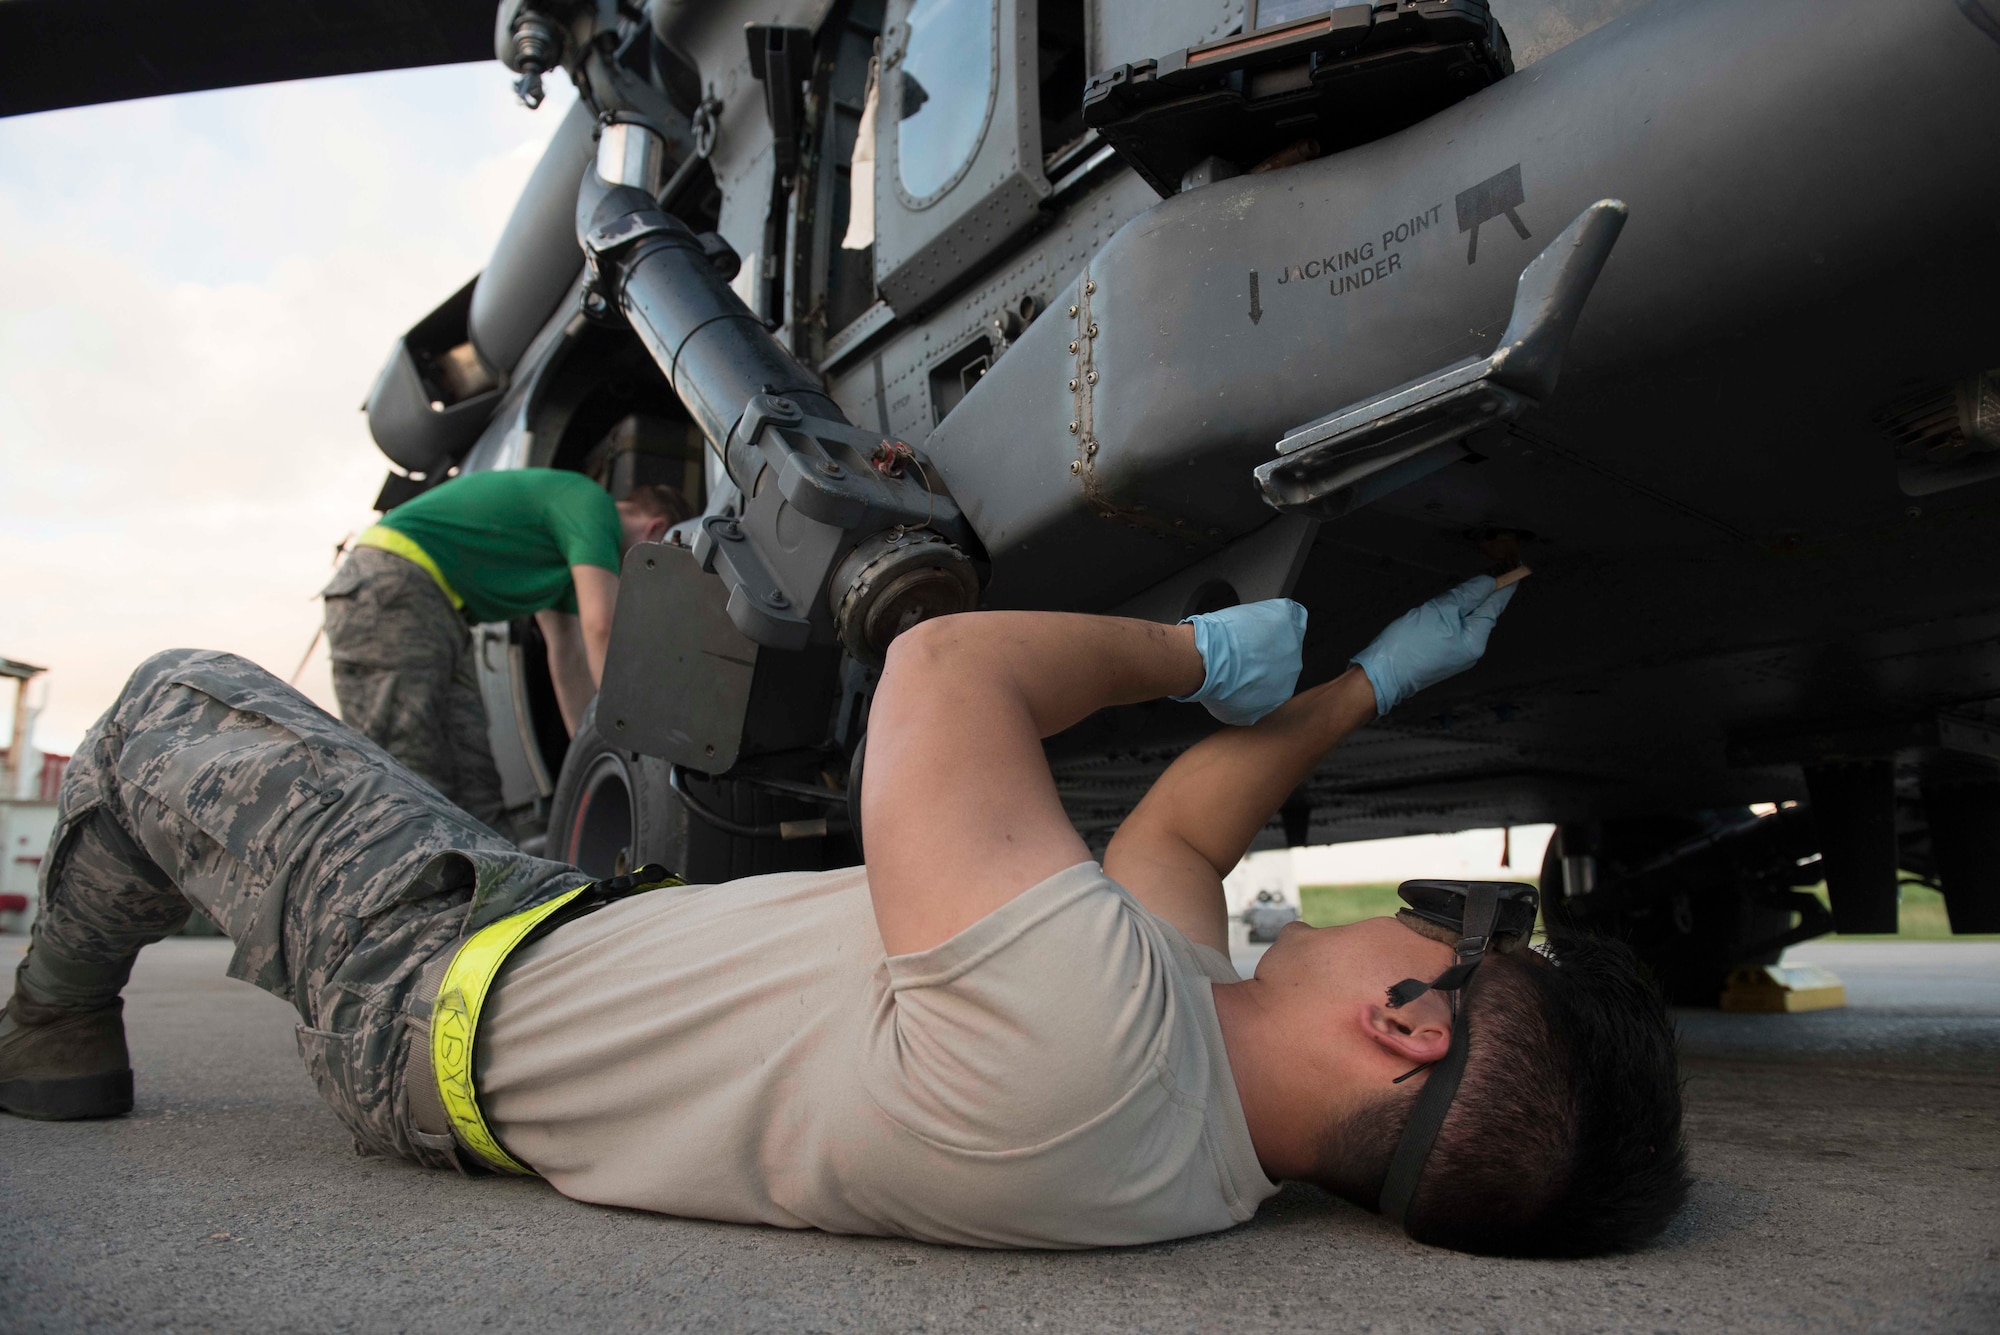 A maintainer from the 33d Helicopter Maintenance Unit, cleans an HH-60G Pave Hawk while checking for corrosion Oct. 25, 2016, at Kadena Air Base, Japan. The 33rd HMU supports the helicopters used by the 33rd Rescue Squadron maintainers to perform their operations.  (U.S. Air Force photo by Senior Airman Omari Bernard/Released)